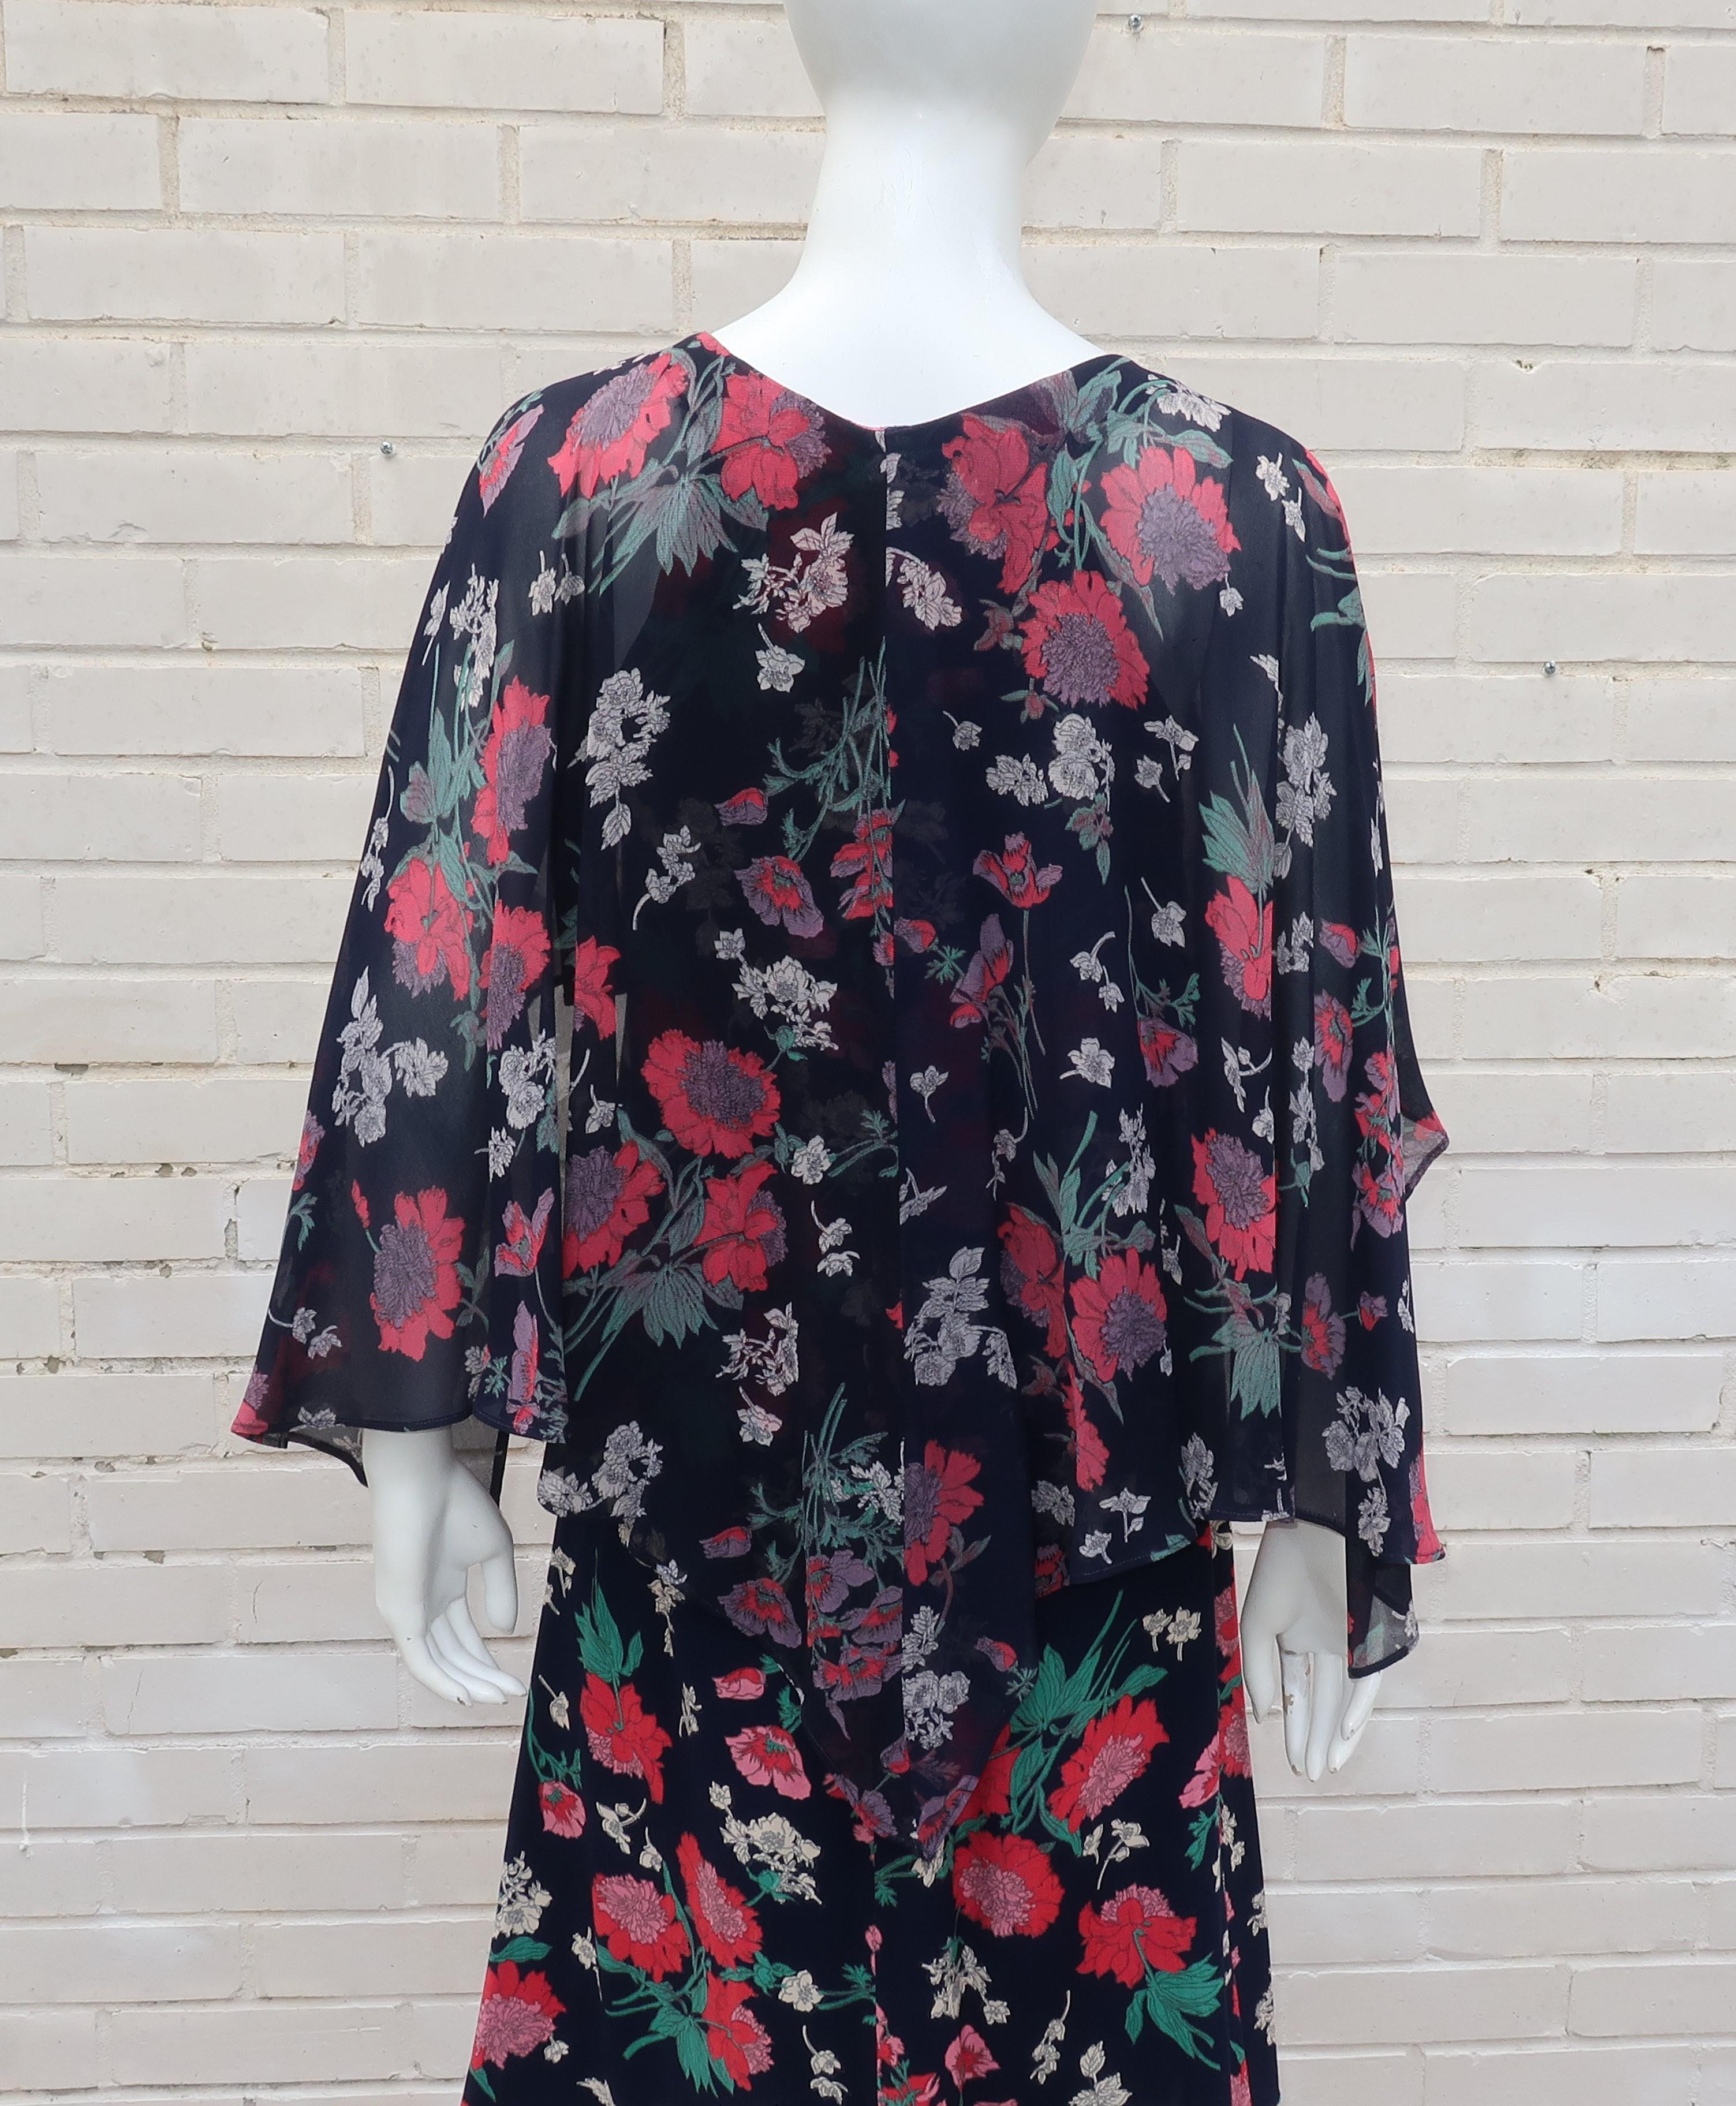 Early Nicole Miller 1970's Floral Bohemian Dress With Overlay  8